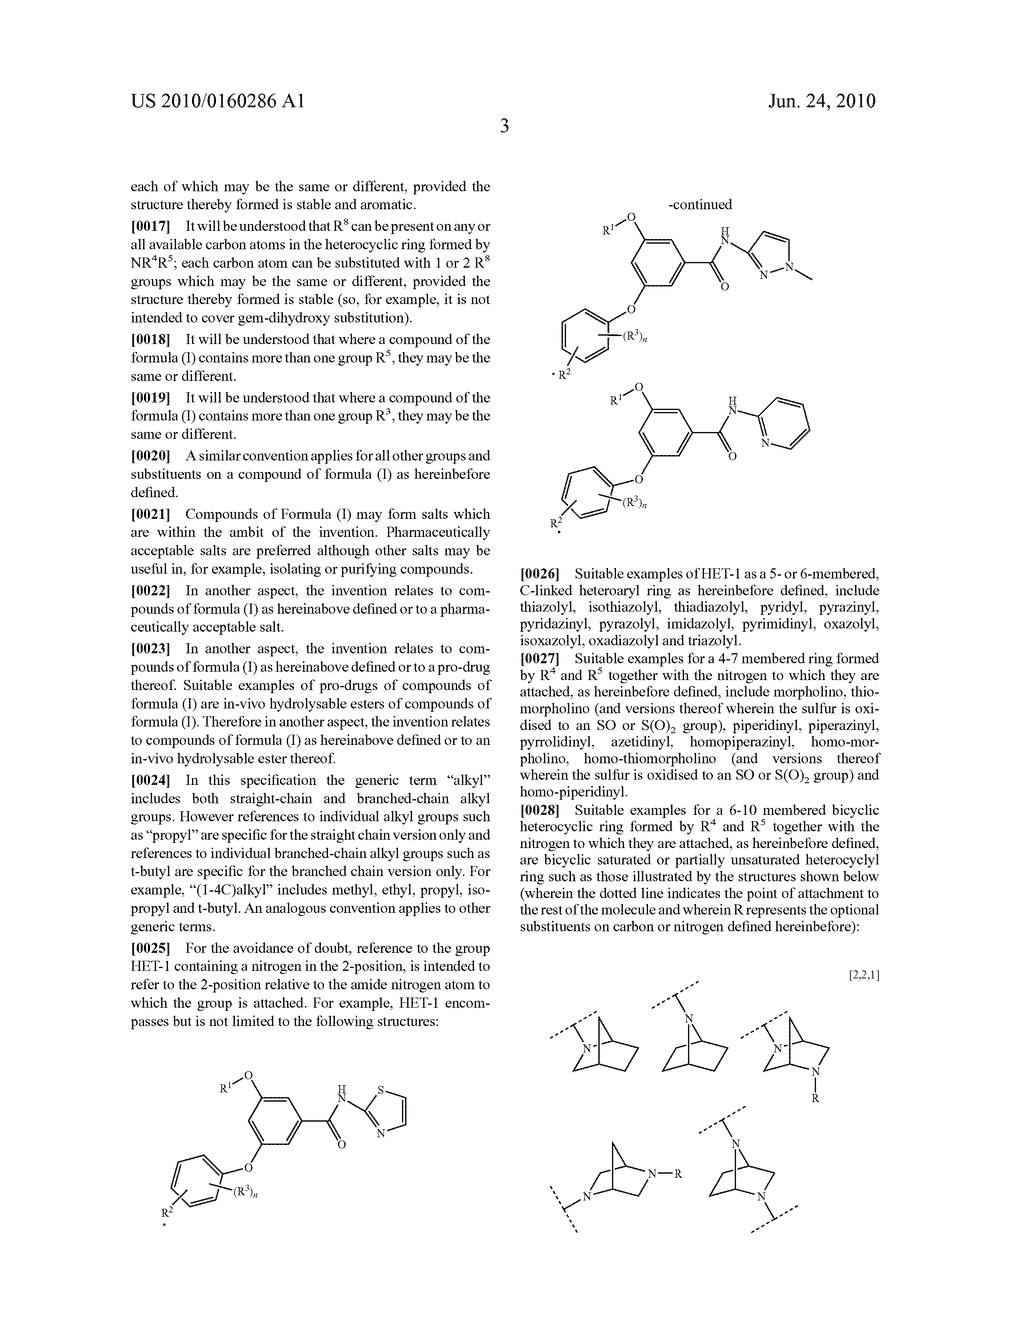 HETEROARYLCARBAMOYLBENZENE DERIVATIVES FOR THE TREATMENT OF DIABETES - diagram, schematic, and image 04